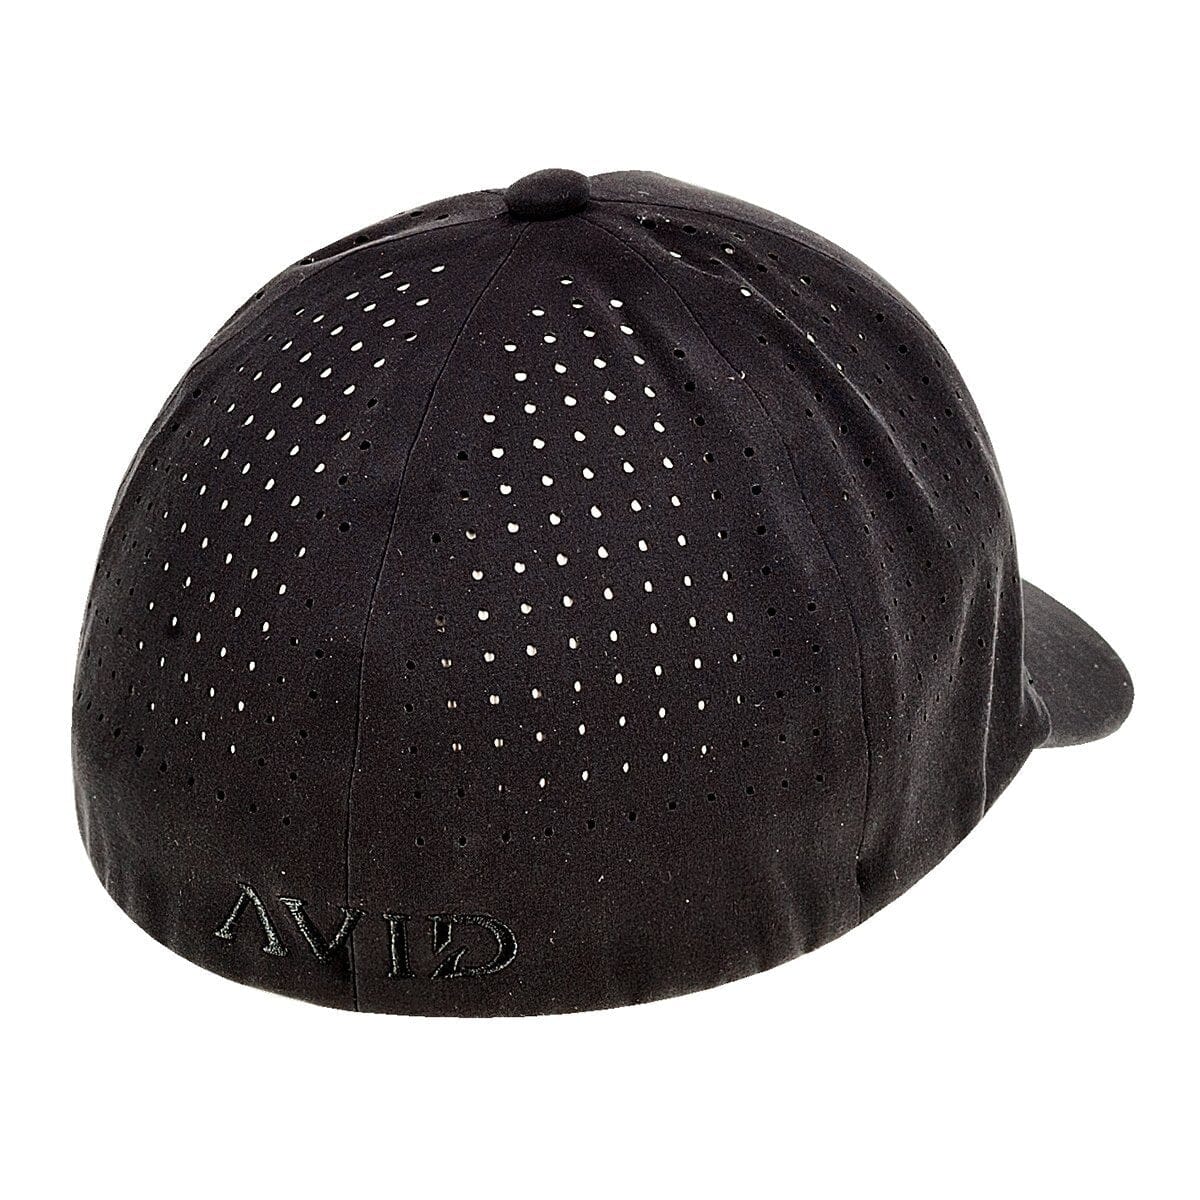 Avid Alpha Performance Fitted Hat Black S M